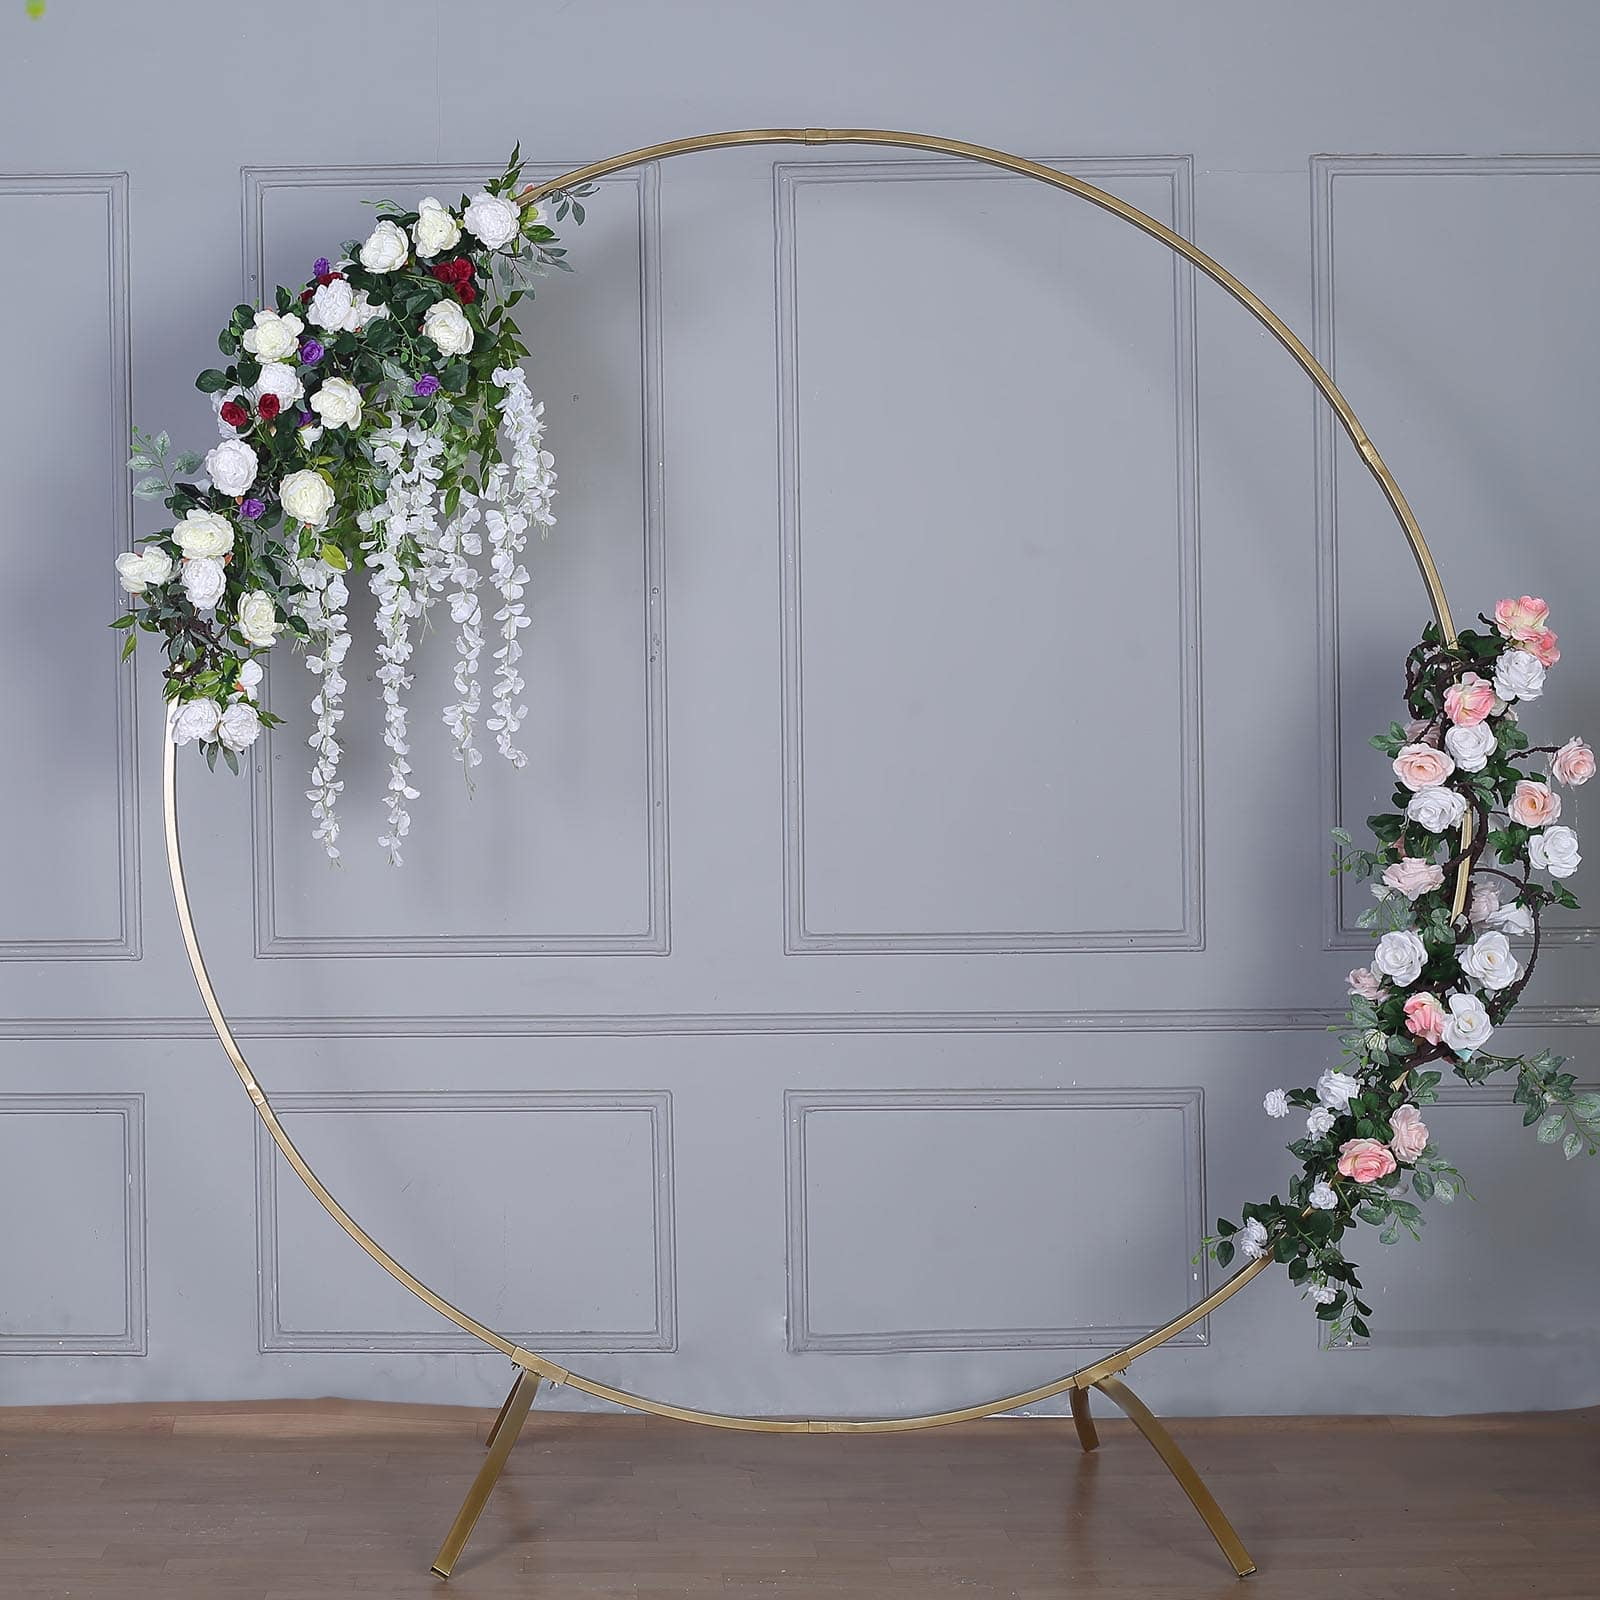 Round Metal Wreath Arch Backdrop Stand Wedding Events Decorations SALE